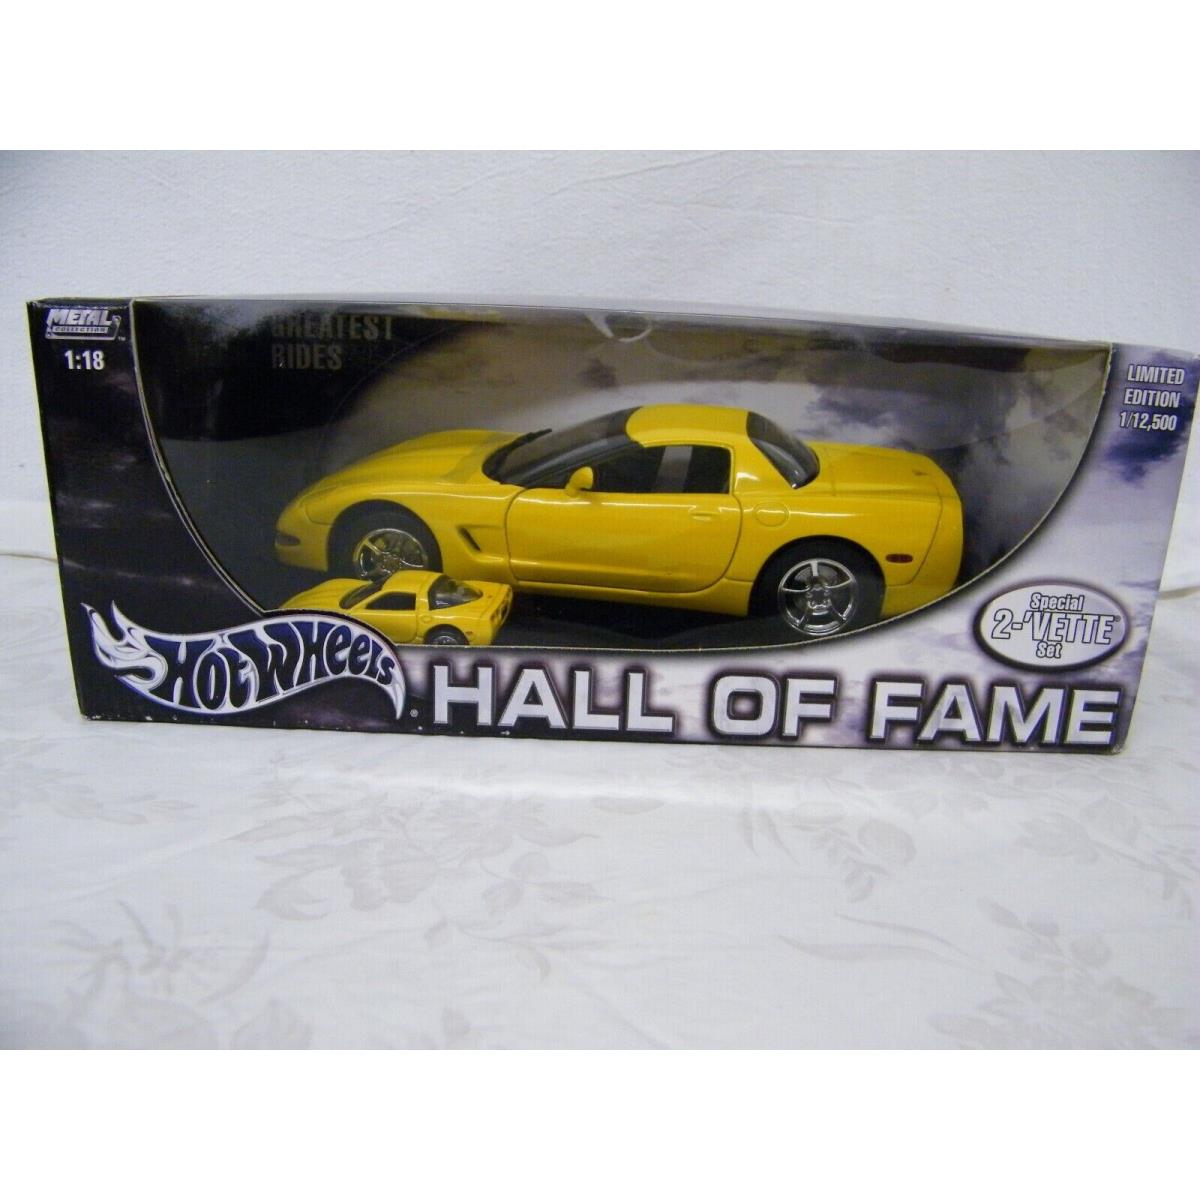 Hot Wheels 1/18 Hall of Fame Collection Special 2 Vette Set Limited Edition